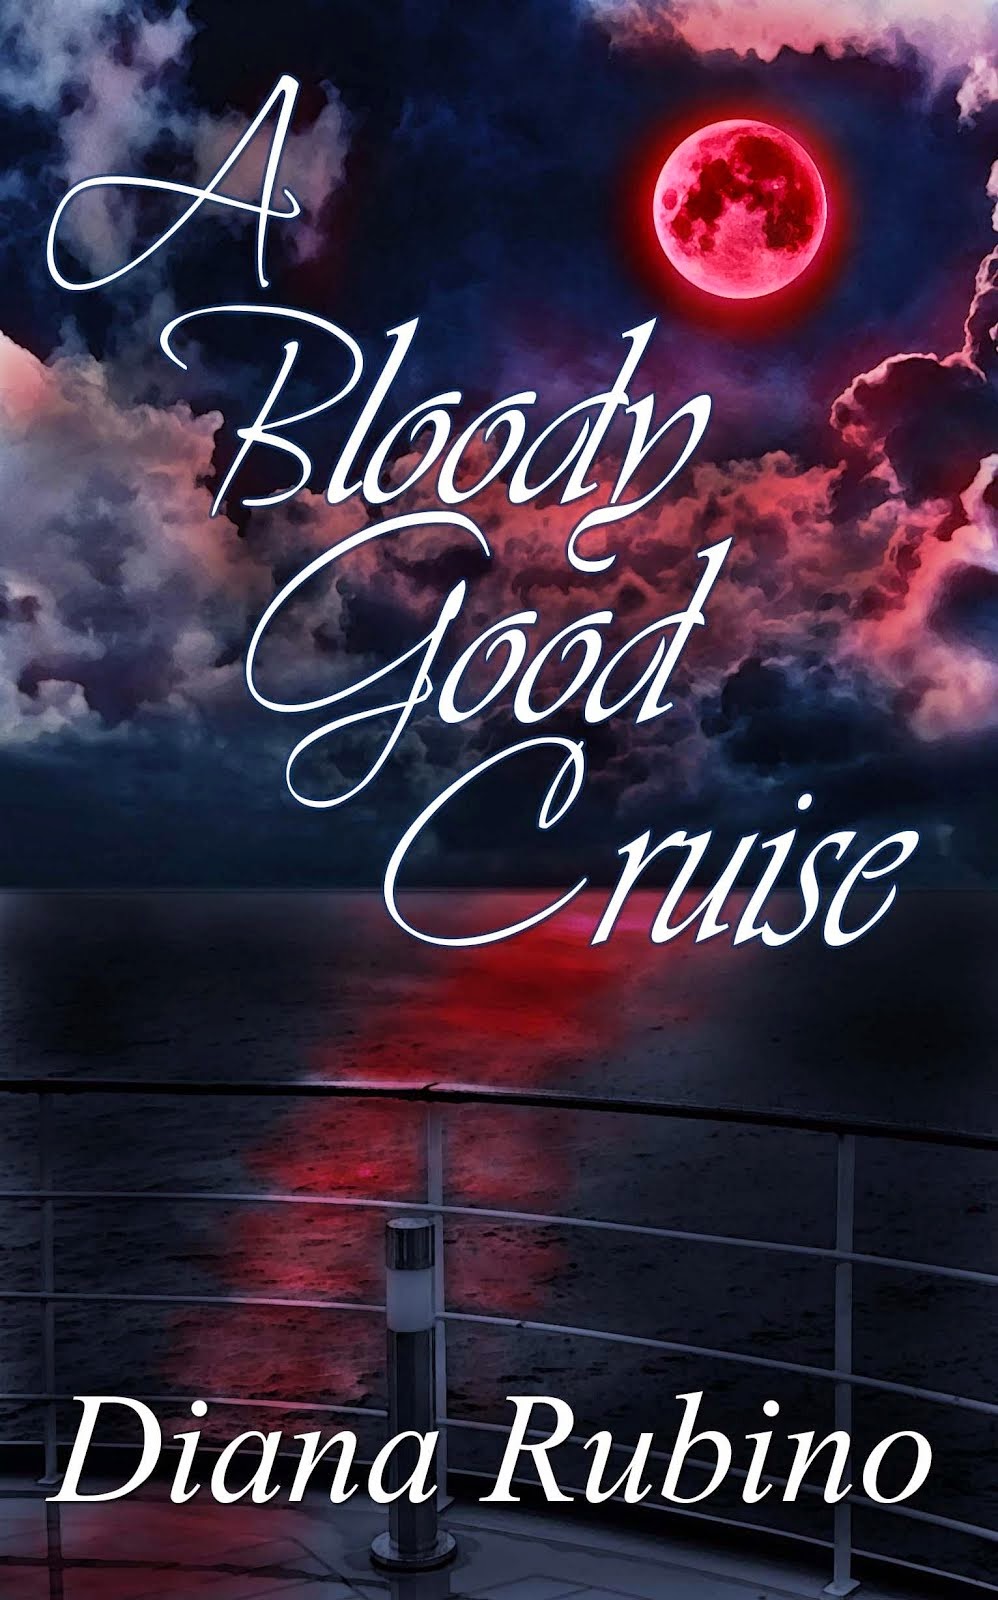 A BLOODY GOOD CRUISE